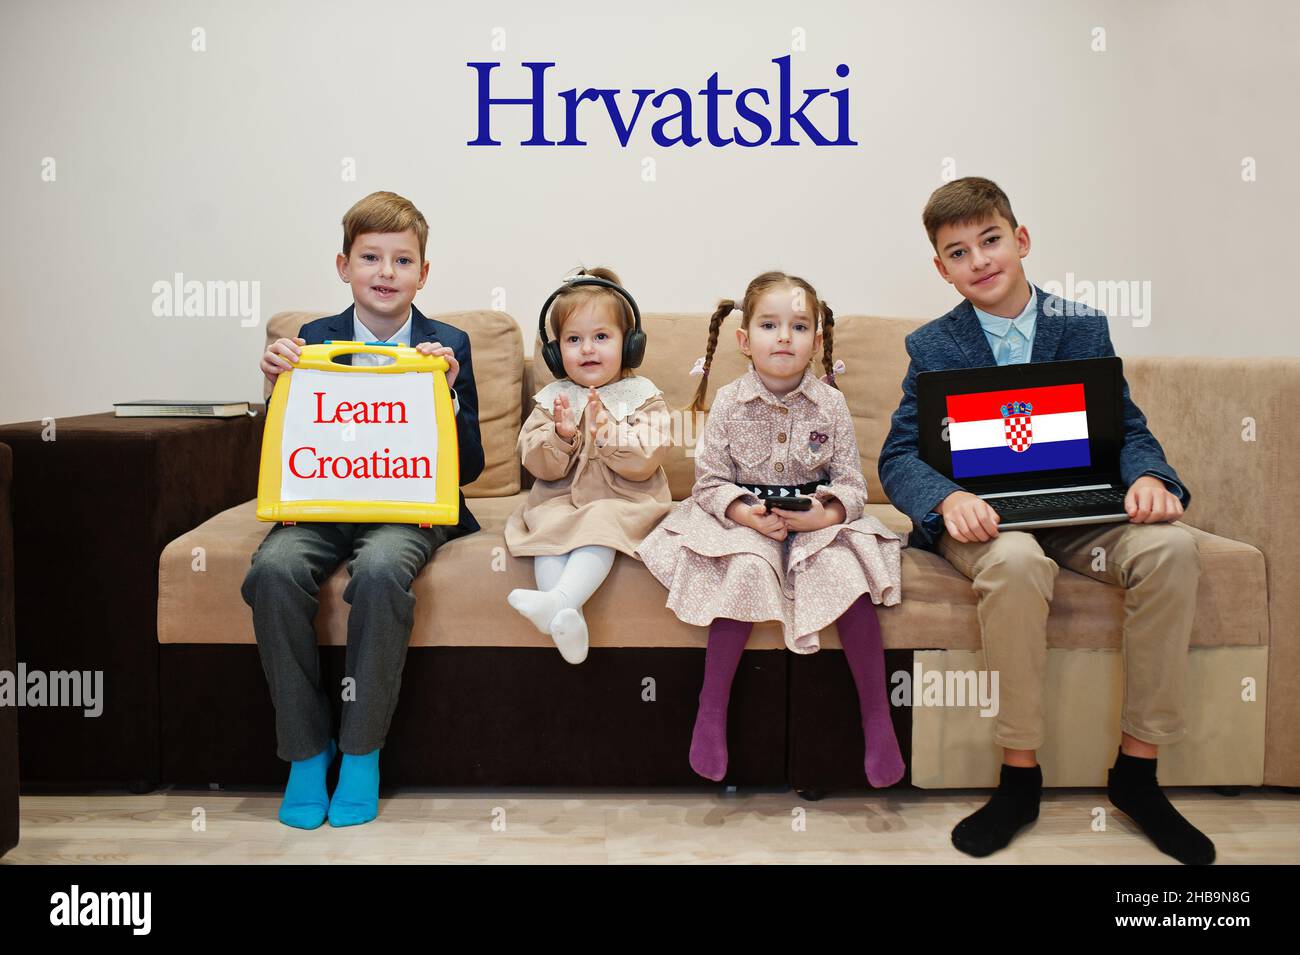 Four kids show inscription learn croatian. Foreign language learning concept. Hrvatski. Stock Photo